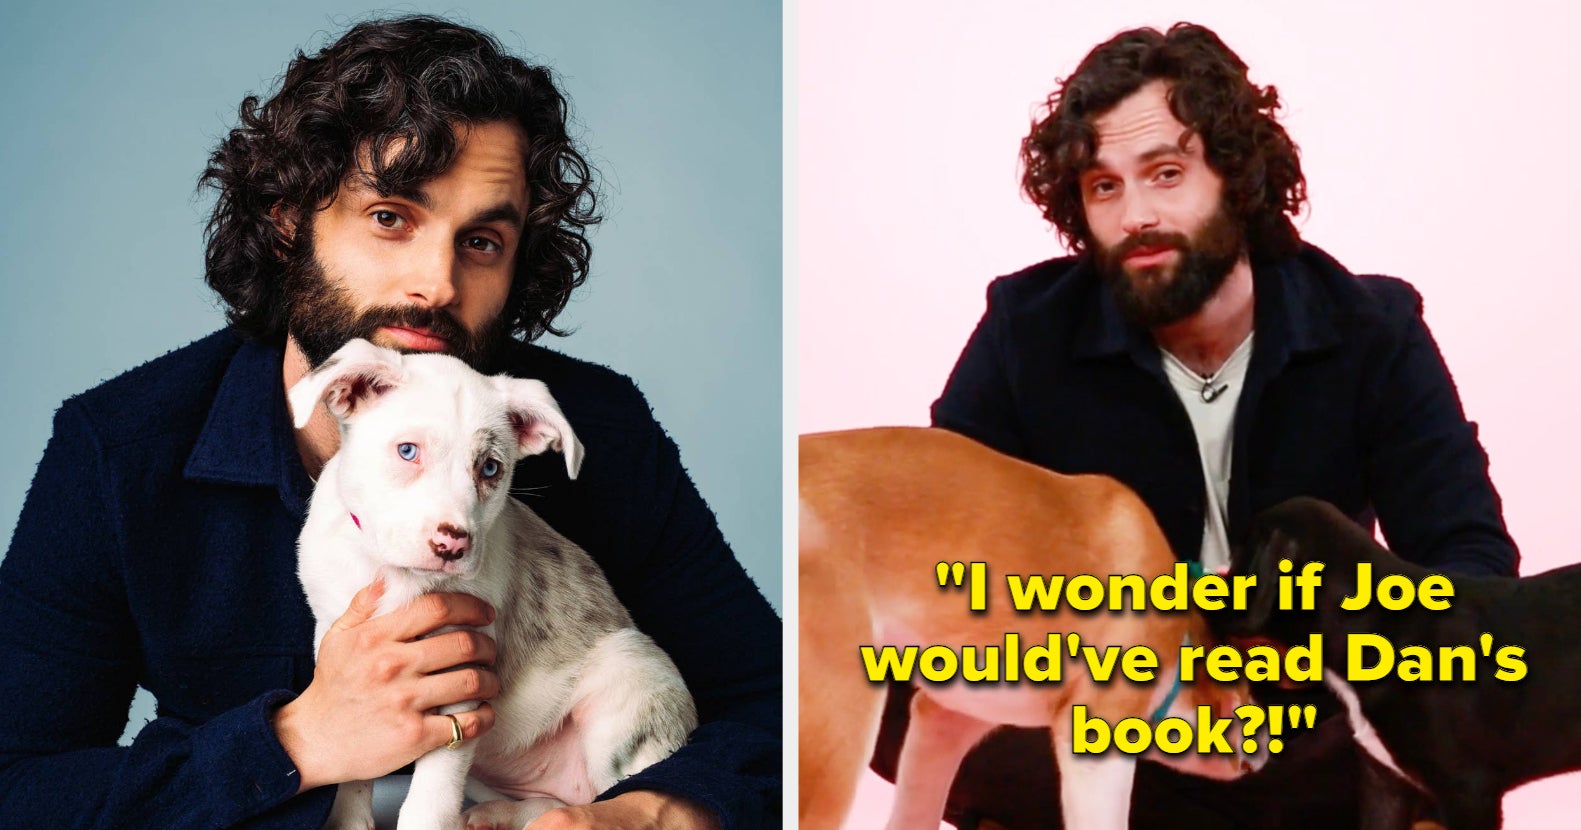 Penn Badgley Talked About “You” Season 4, The Last “Gossip Girl” Cast Member He Texted, And More, All While Playing With Puppies